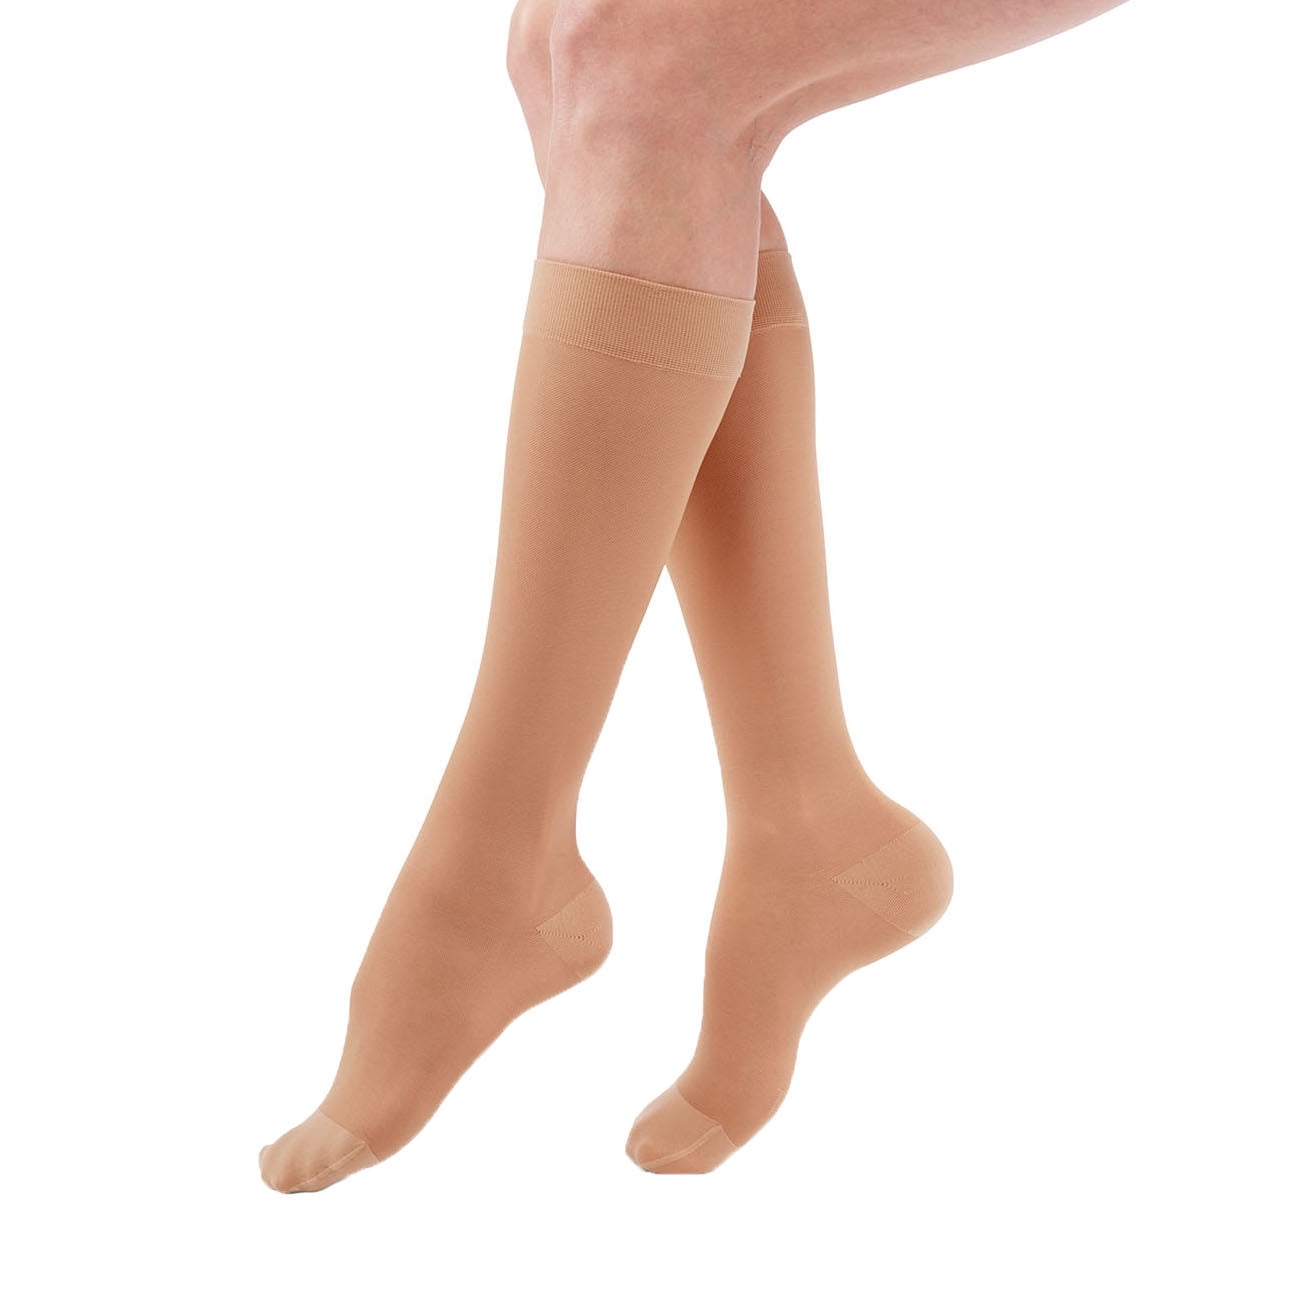 duomed Transparent Sheer 20-30 mmHg Knee High Closed Toe Compression  Stockings, Nude, Medium, Standard